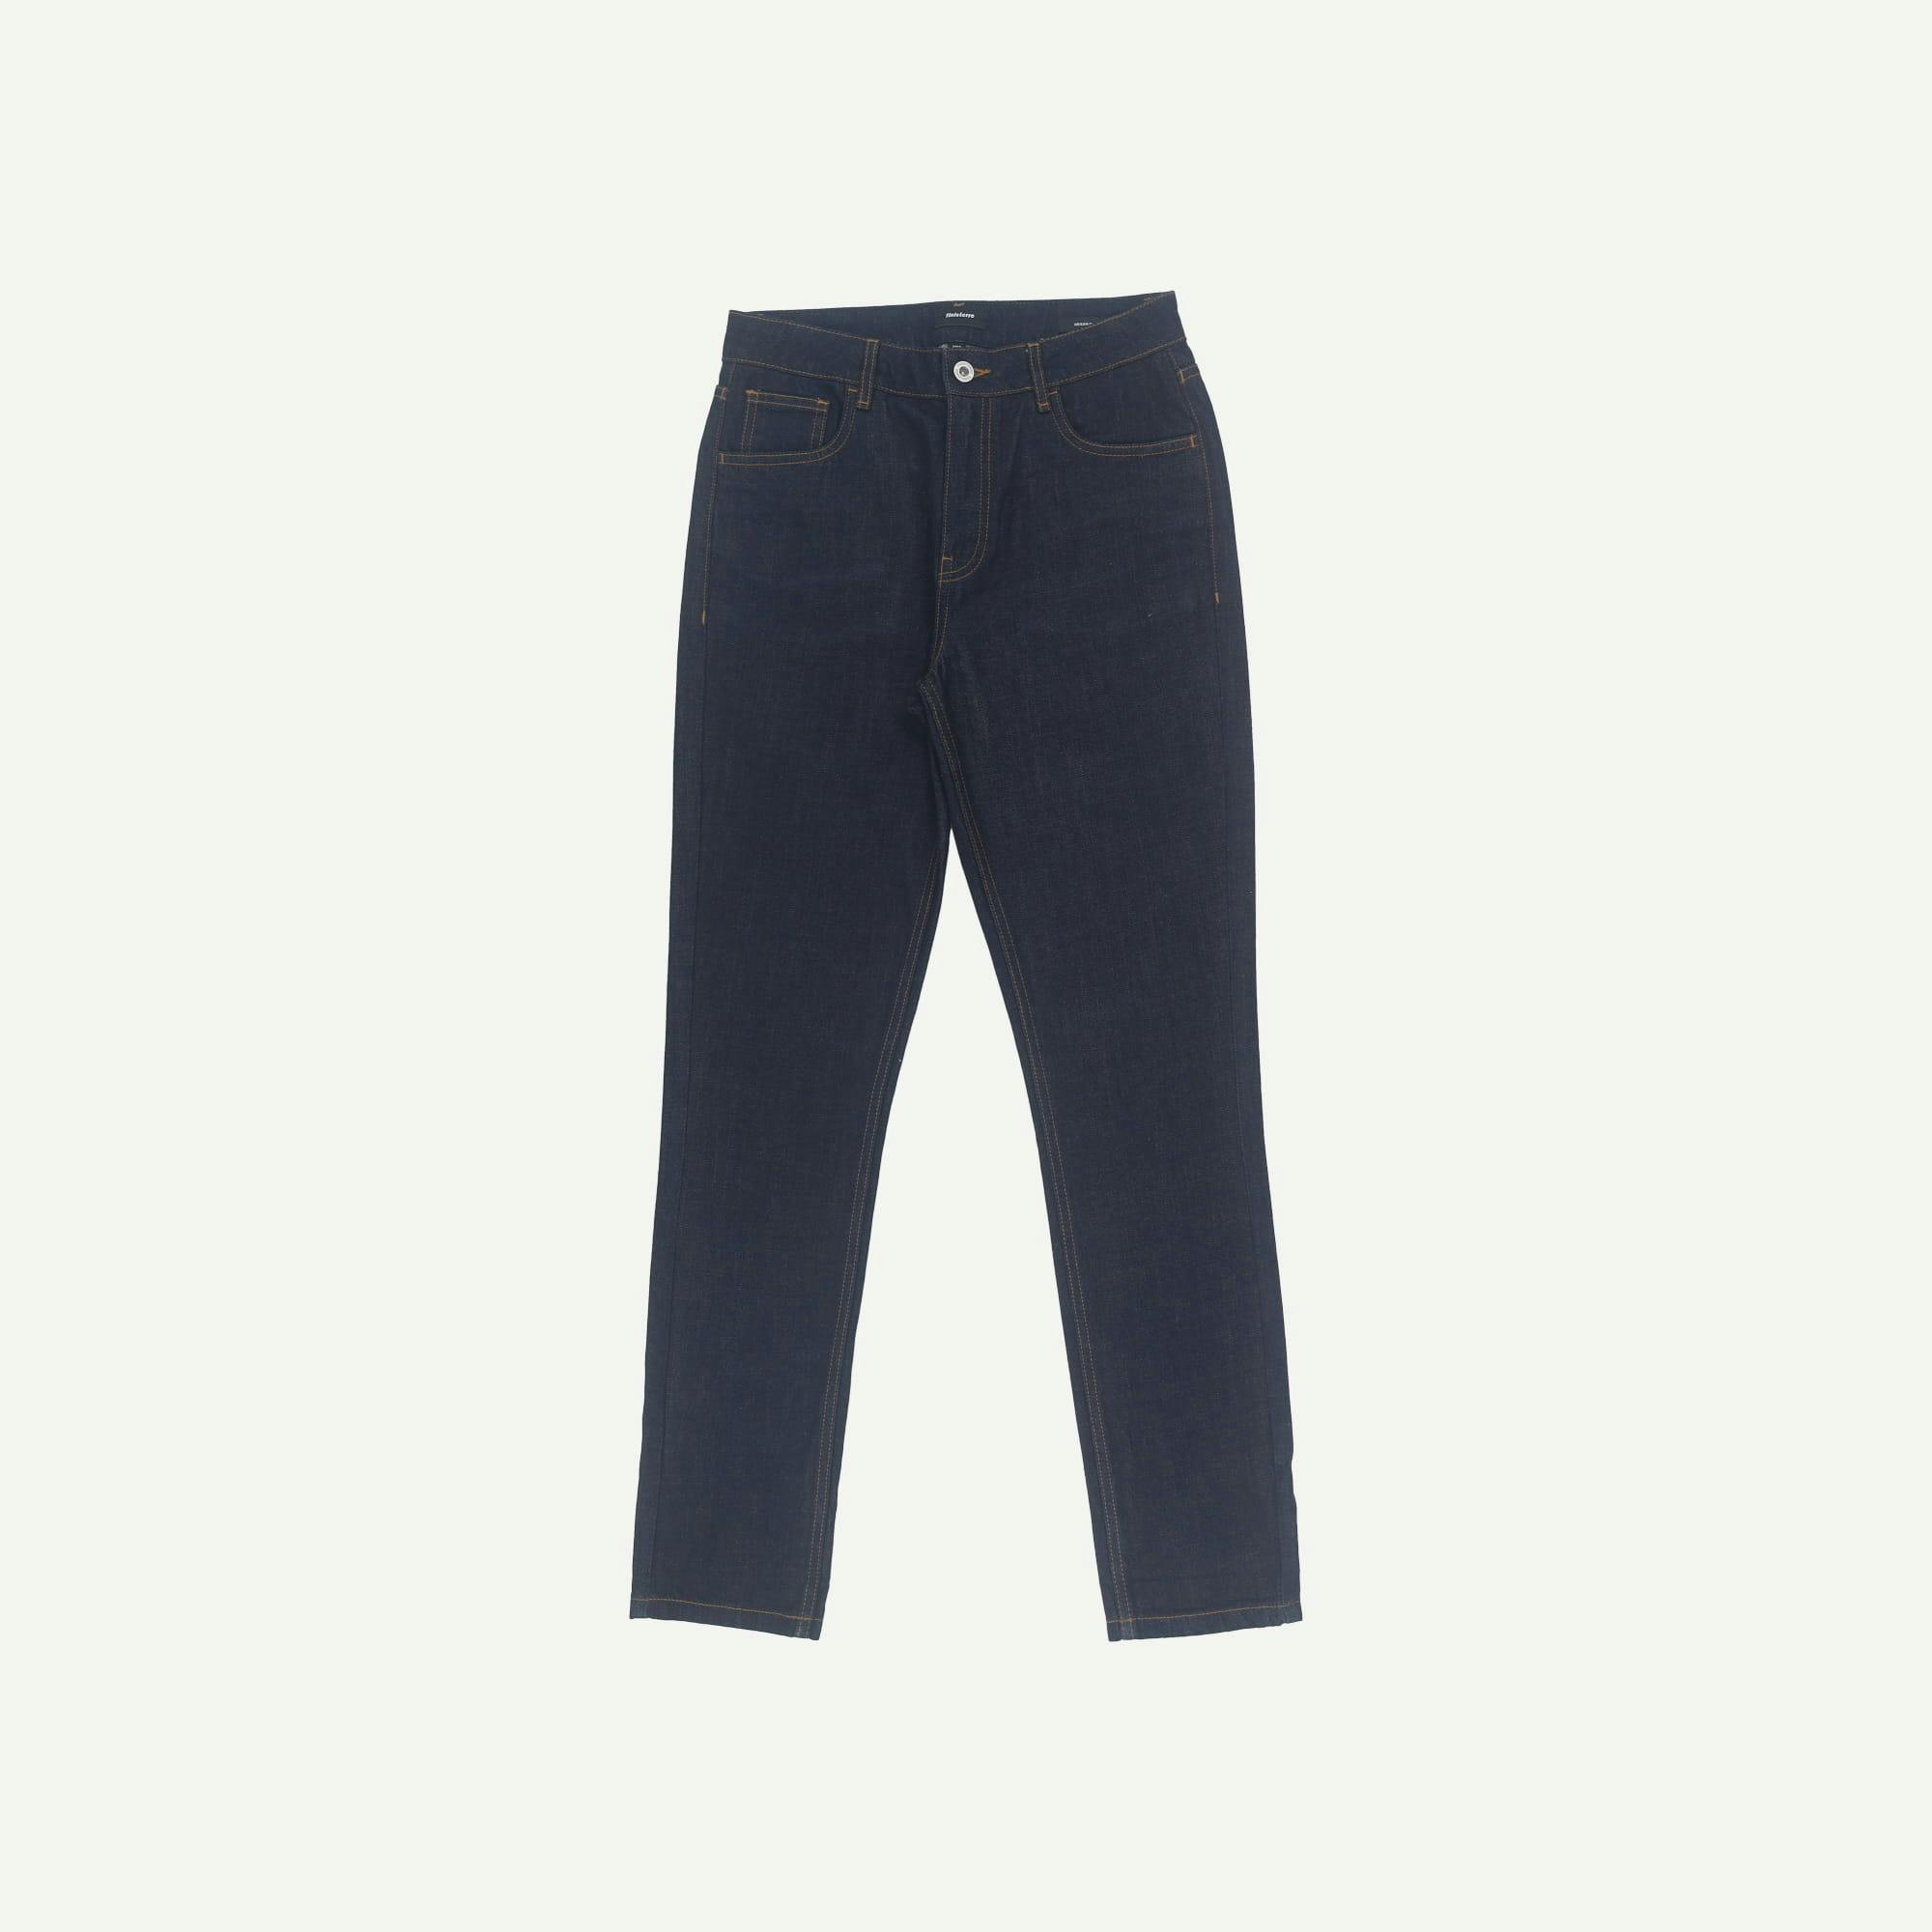 Finisterre As new Navy Jeans